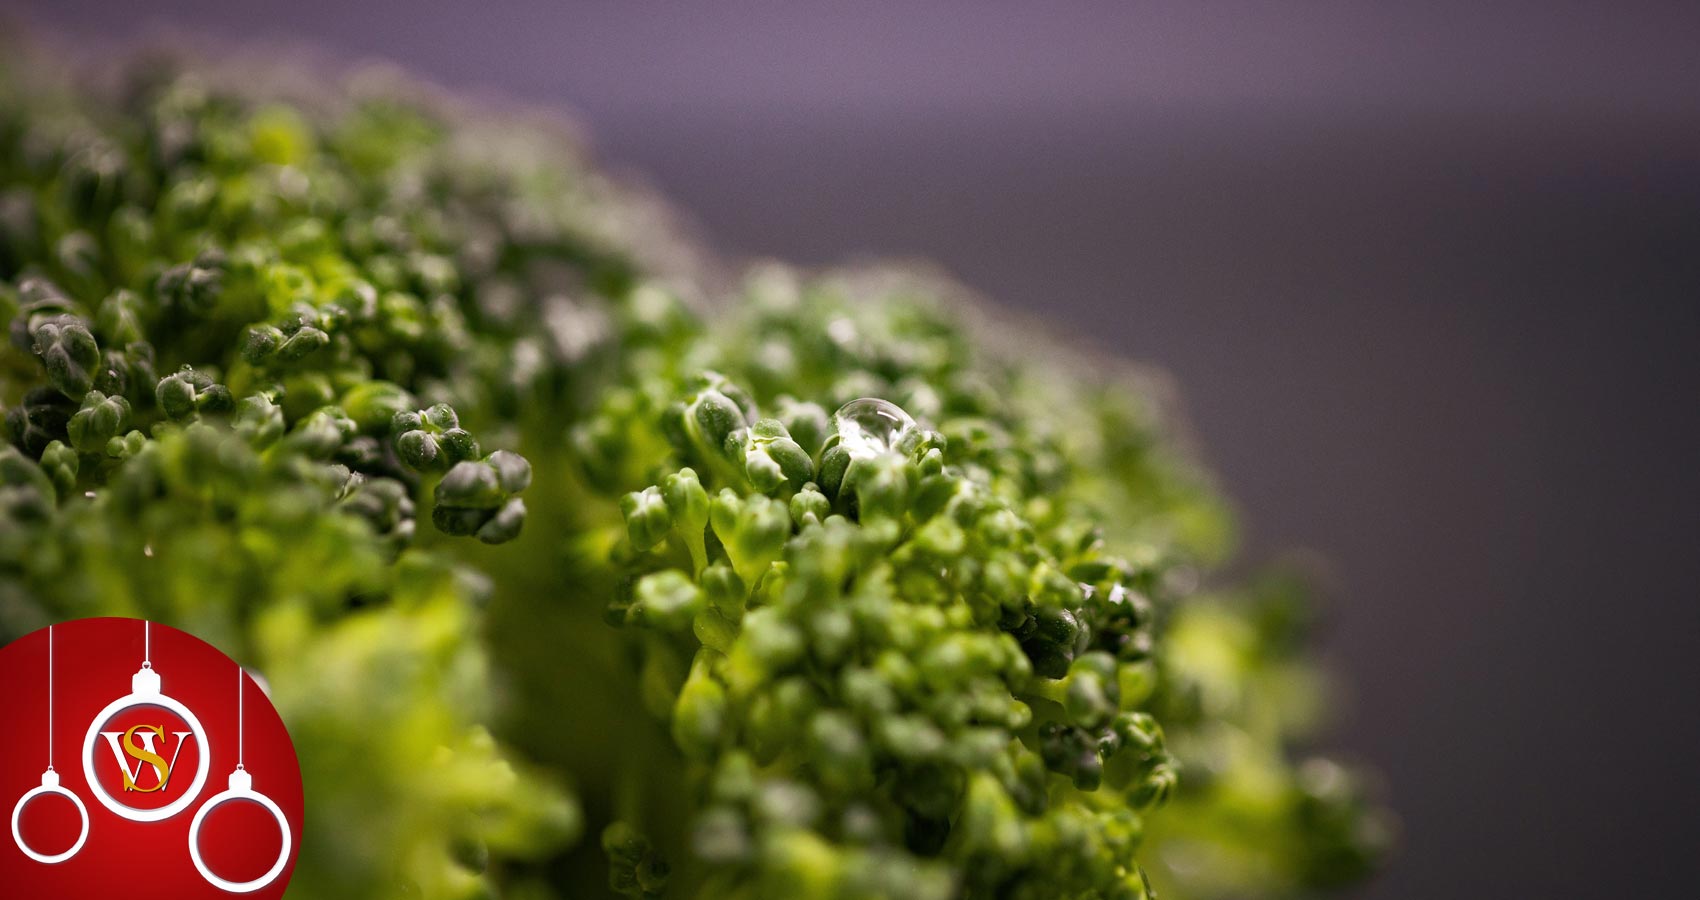 Broccoli. a short story by Marion Donnellier at Spillwords.com